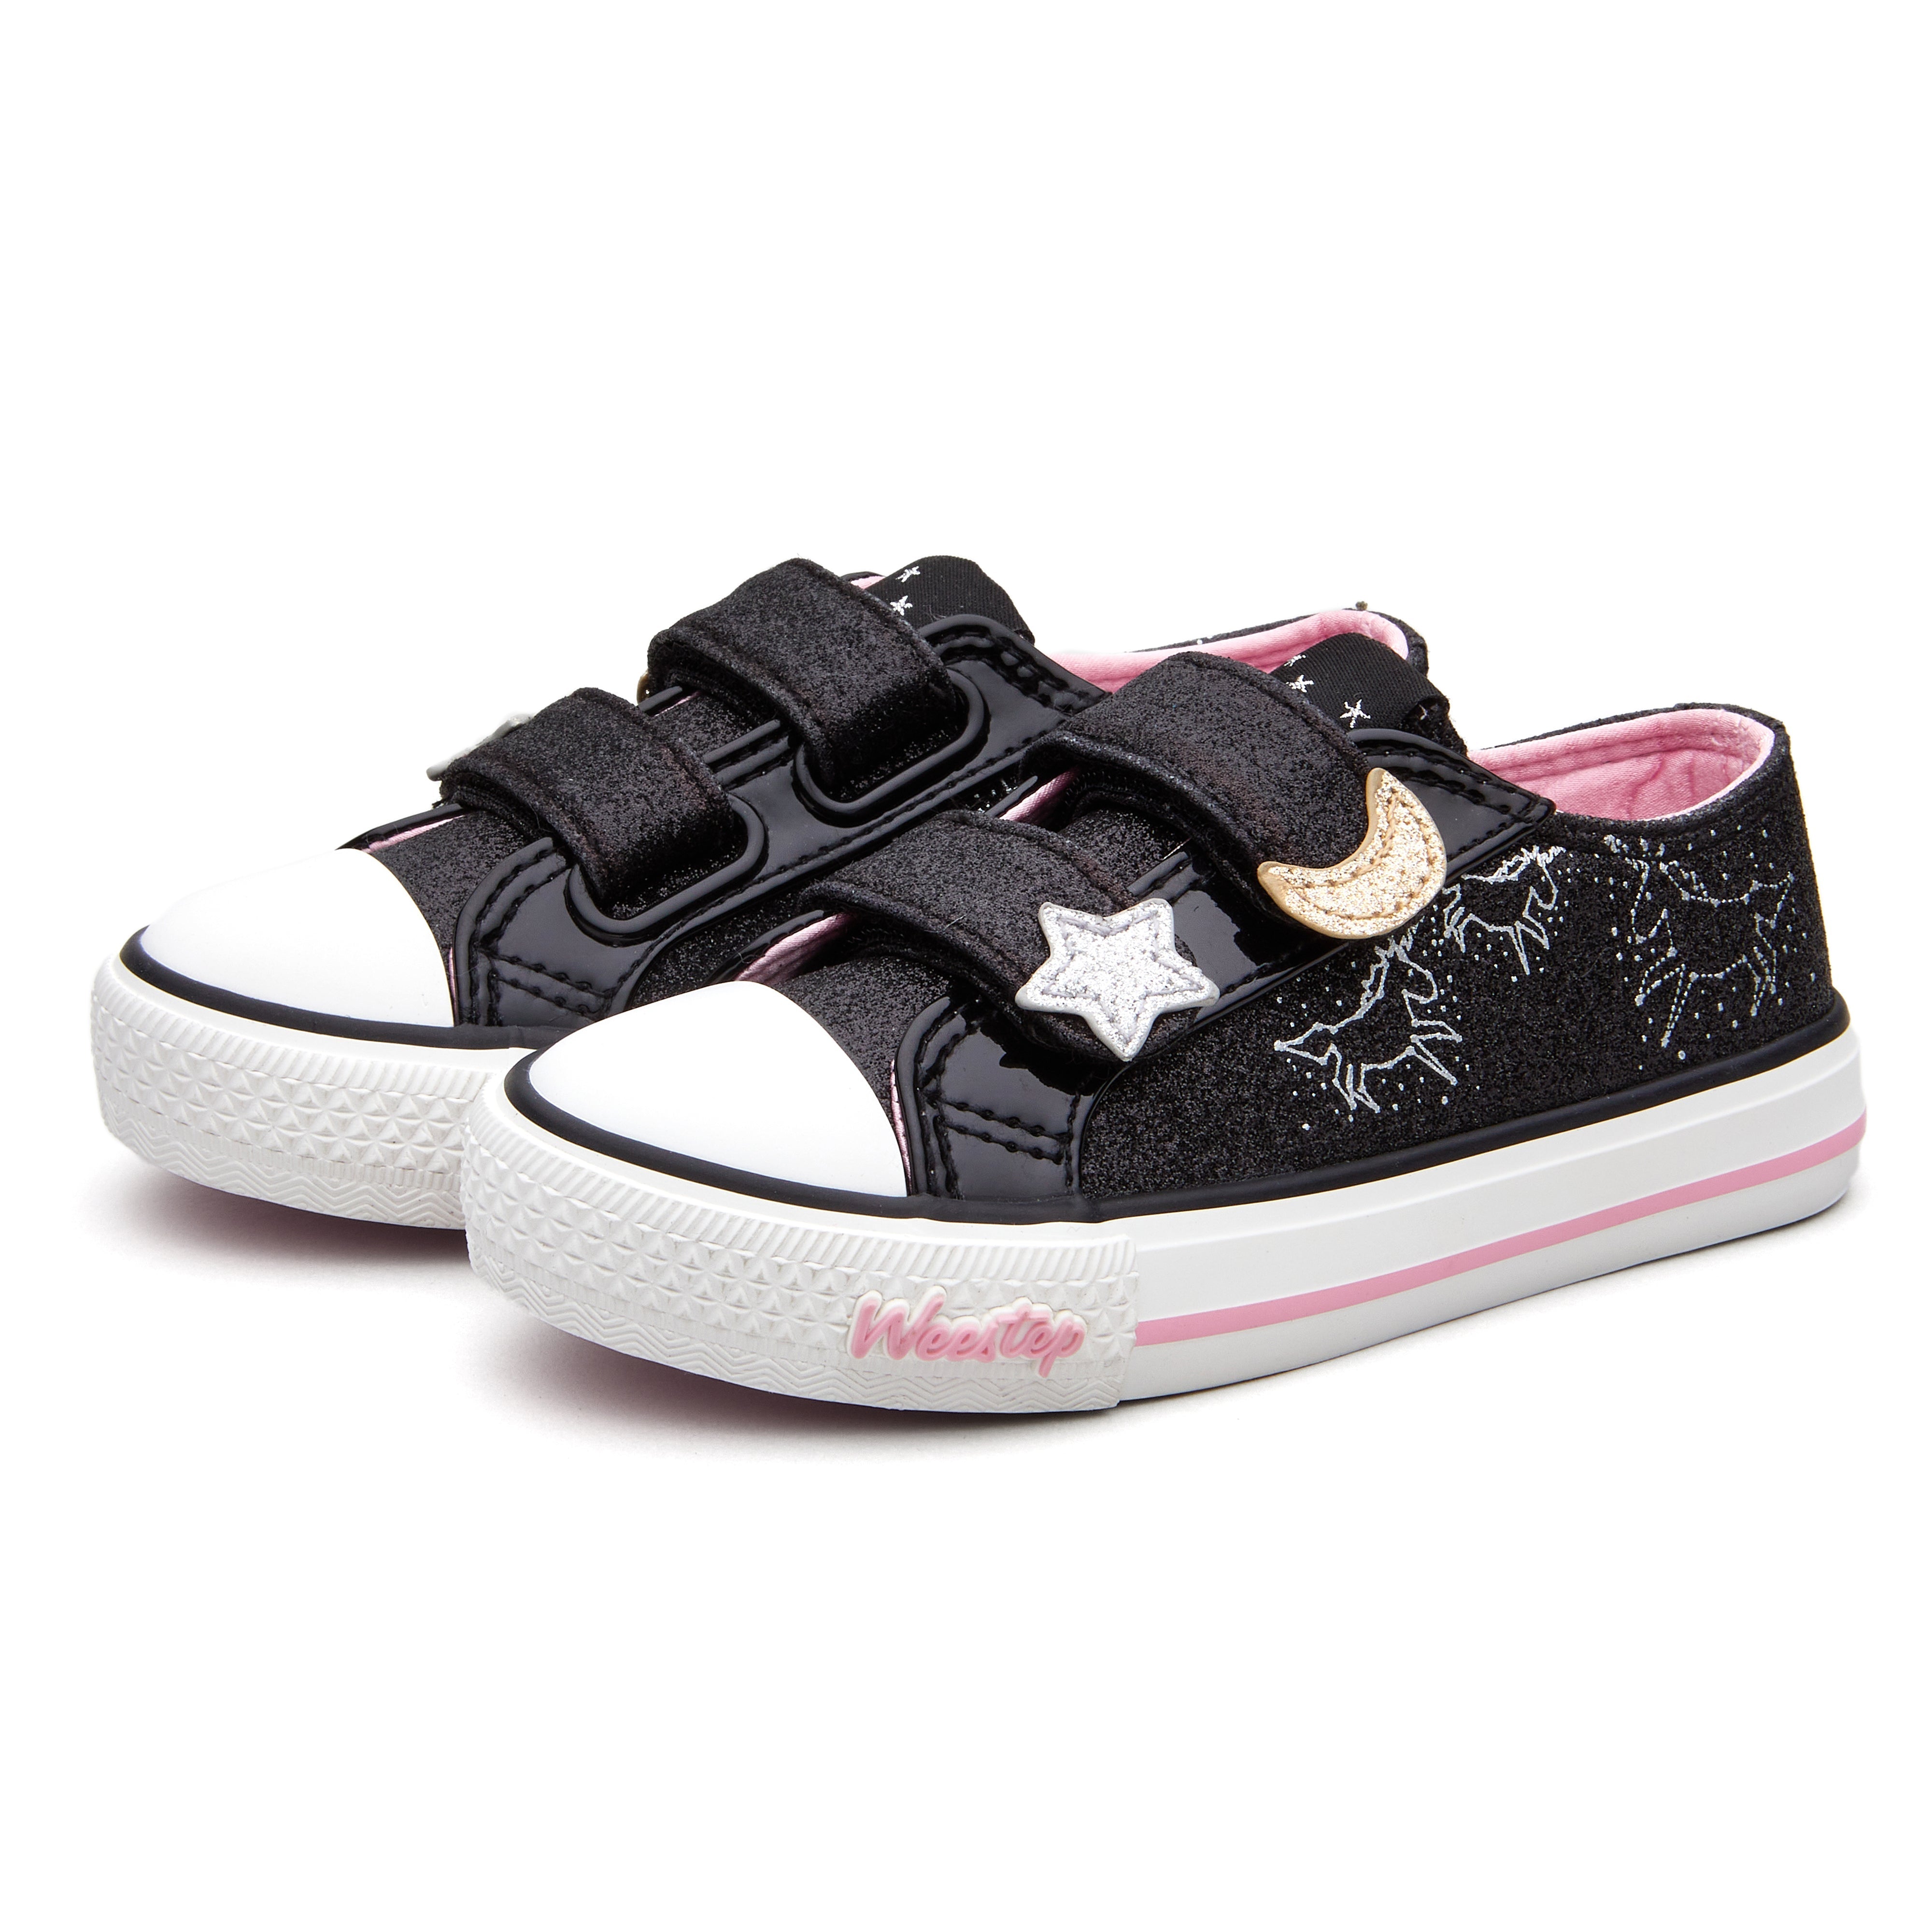 Weestep  Kids Shoes,Toddler Shoes, Girls Shoes, Boys Shoes, Fashion